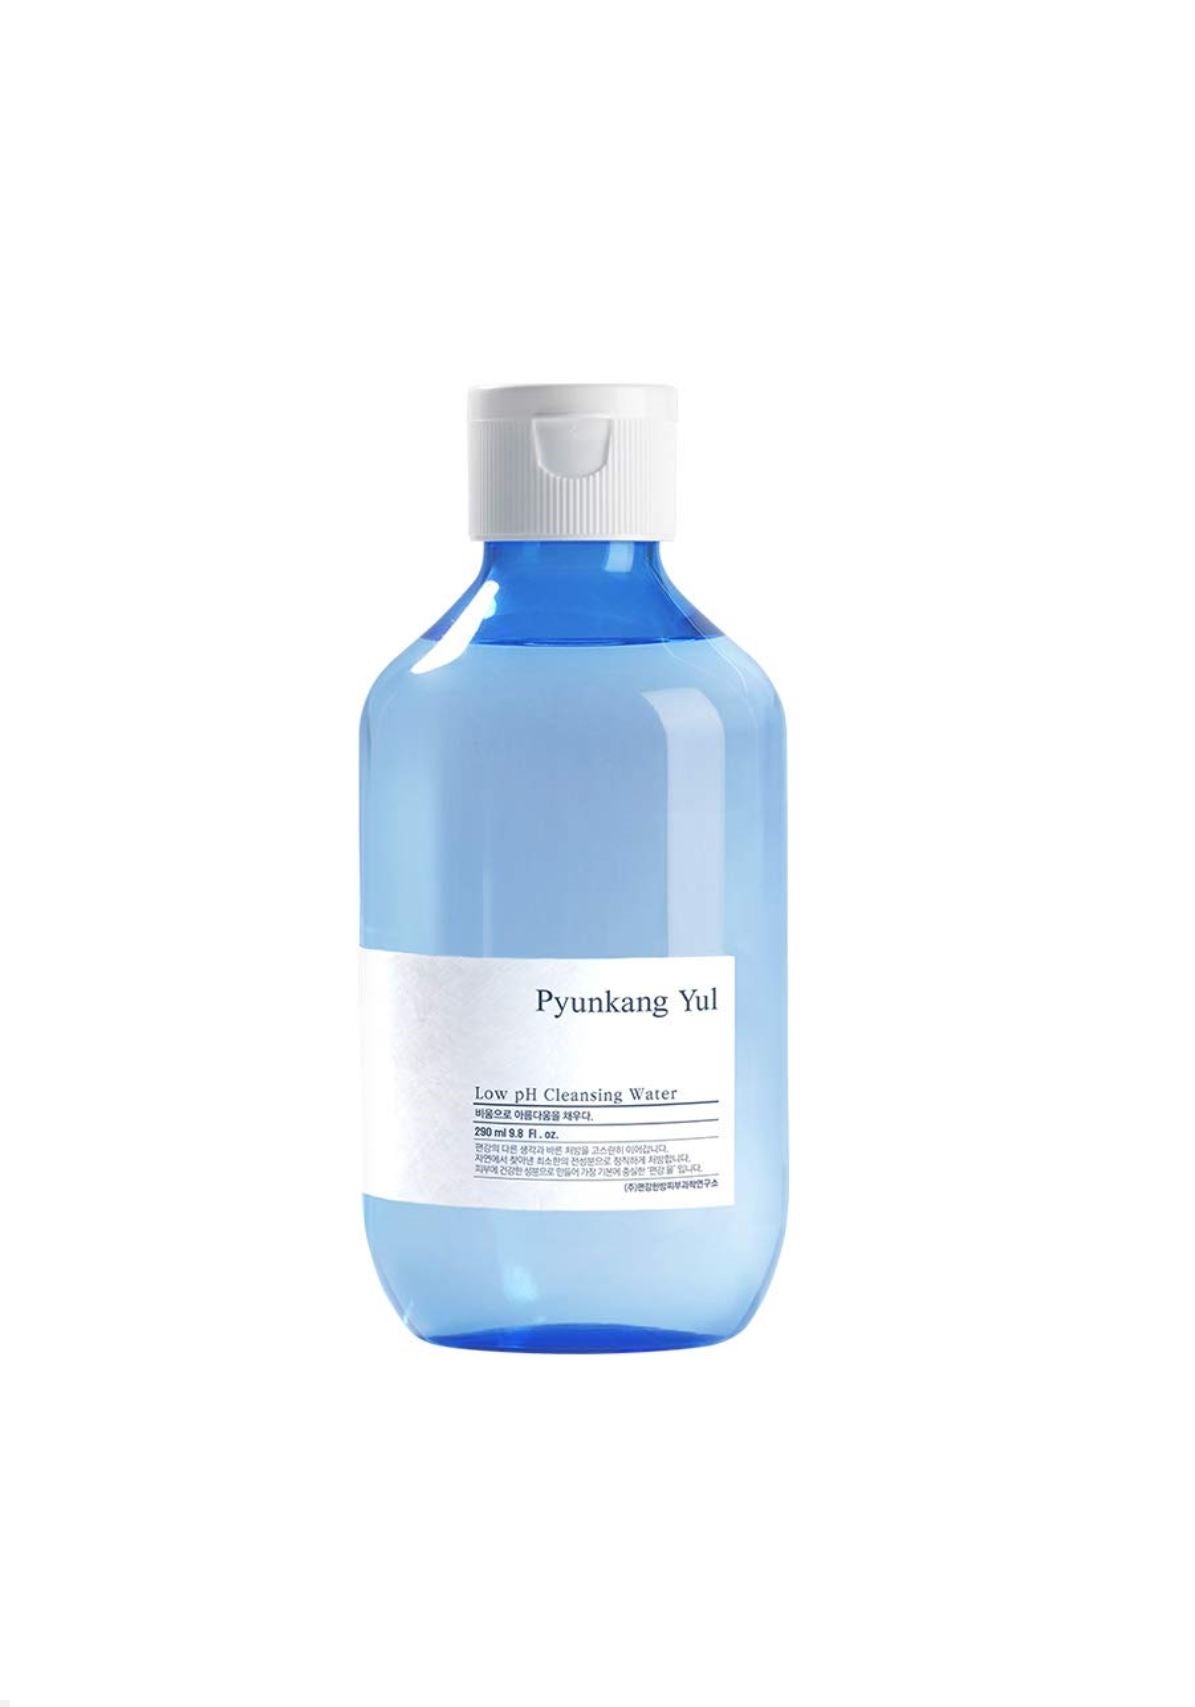 Low pH Cleansing Water